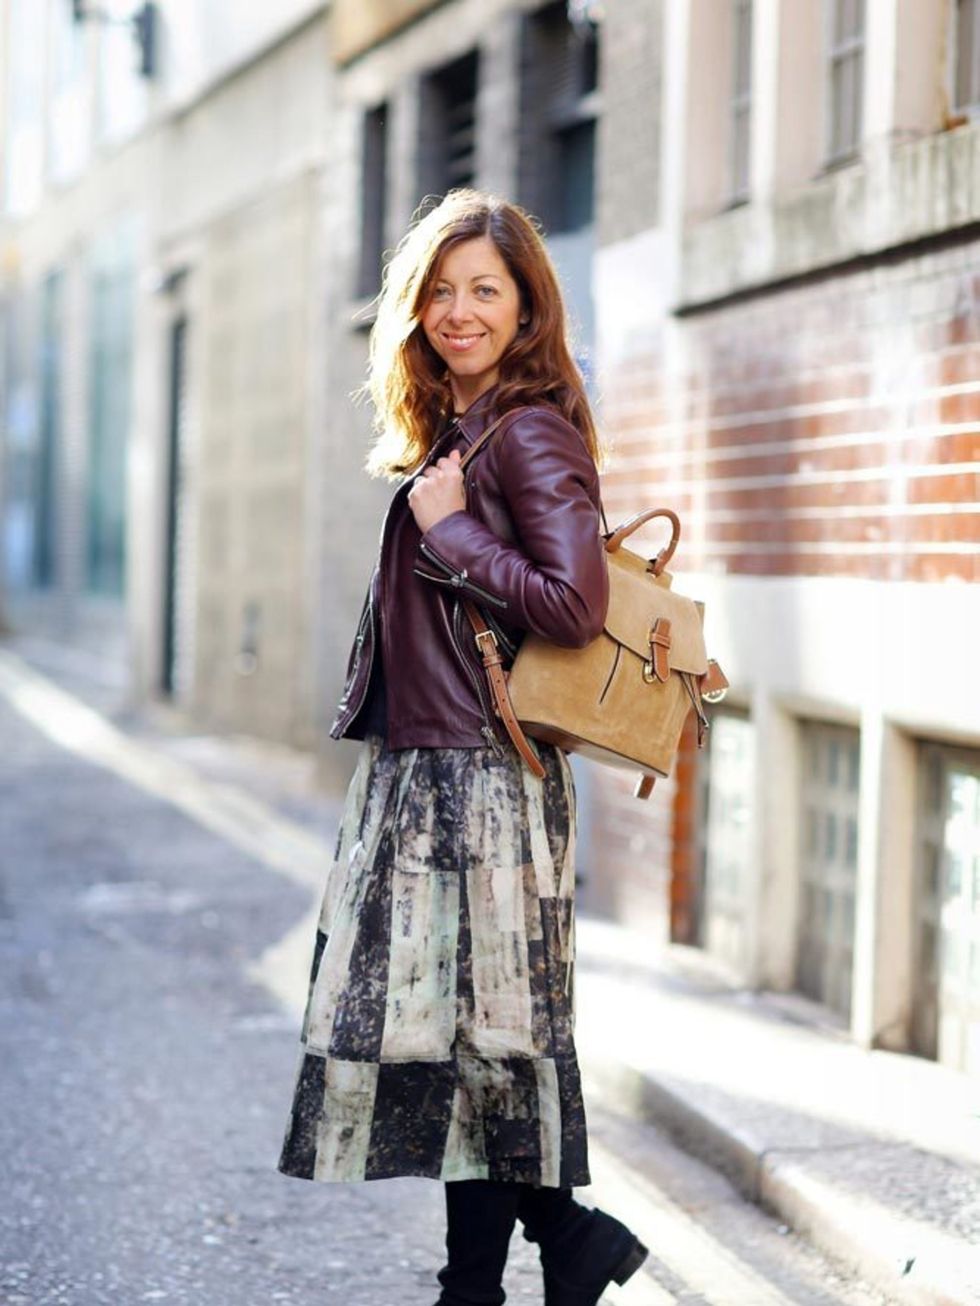 <p>Kirsty Dale, Executive Fashion & Beauty Director</p>

<p>Whistles leather jacket, Banana Republic jumper, Whistles skirt, Stuart Weitzman boots, Michael Kors Collection rucksack</p>